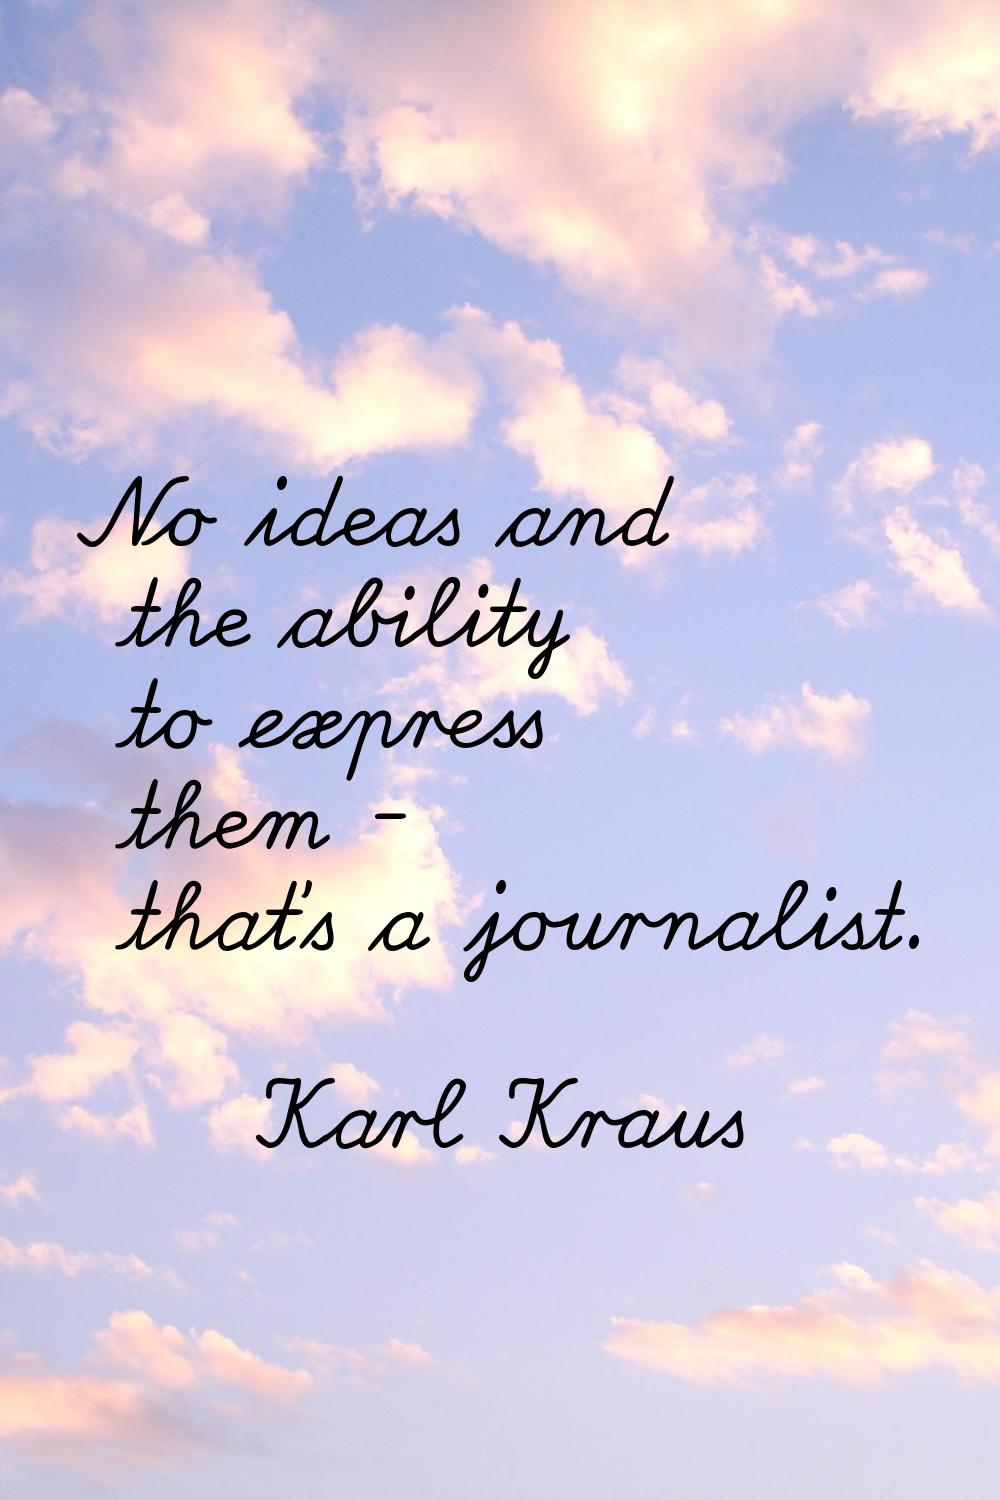 No ideas and the ability to express them - that's a journalist.